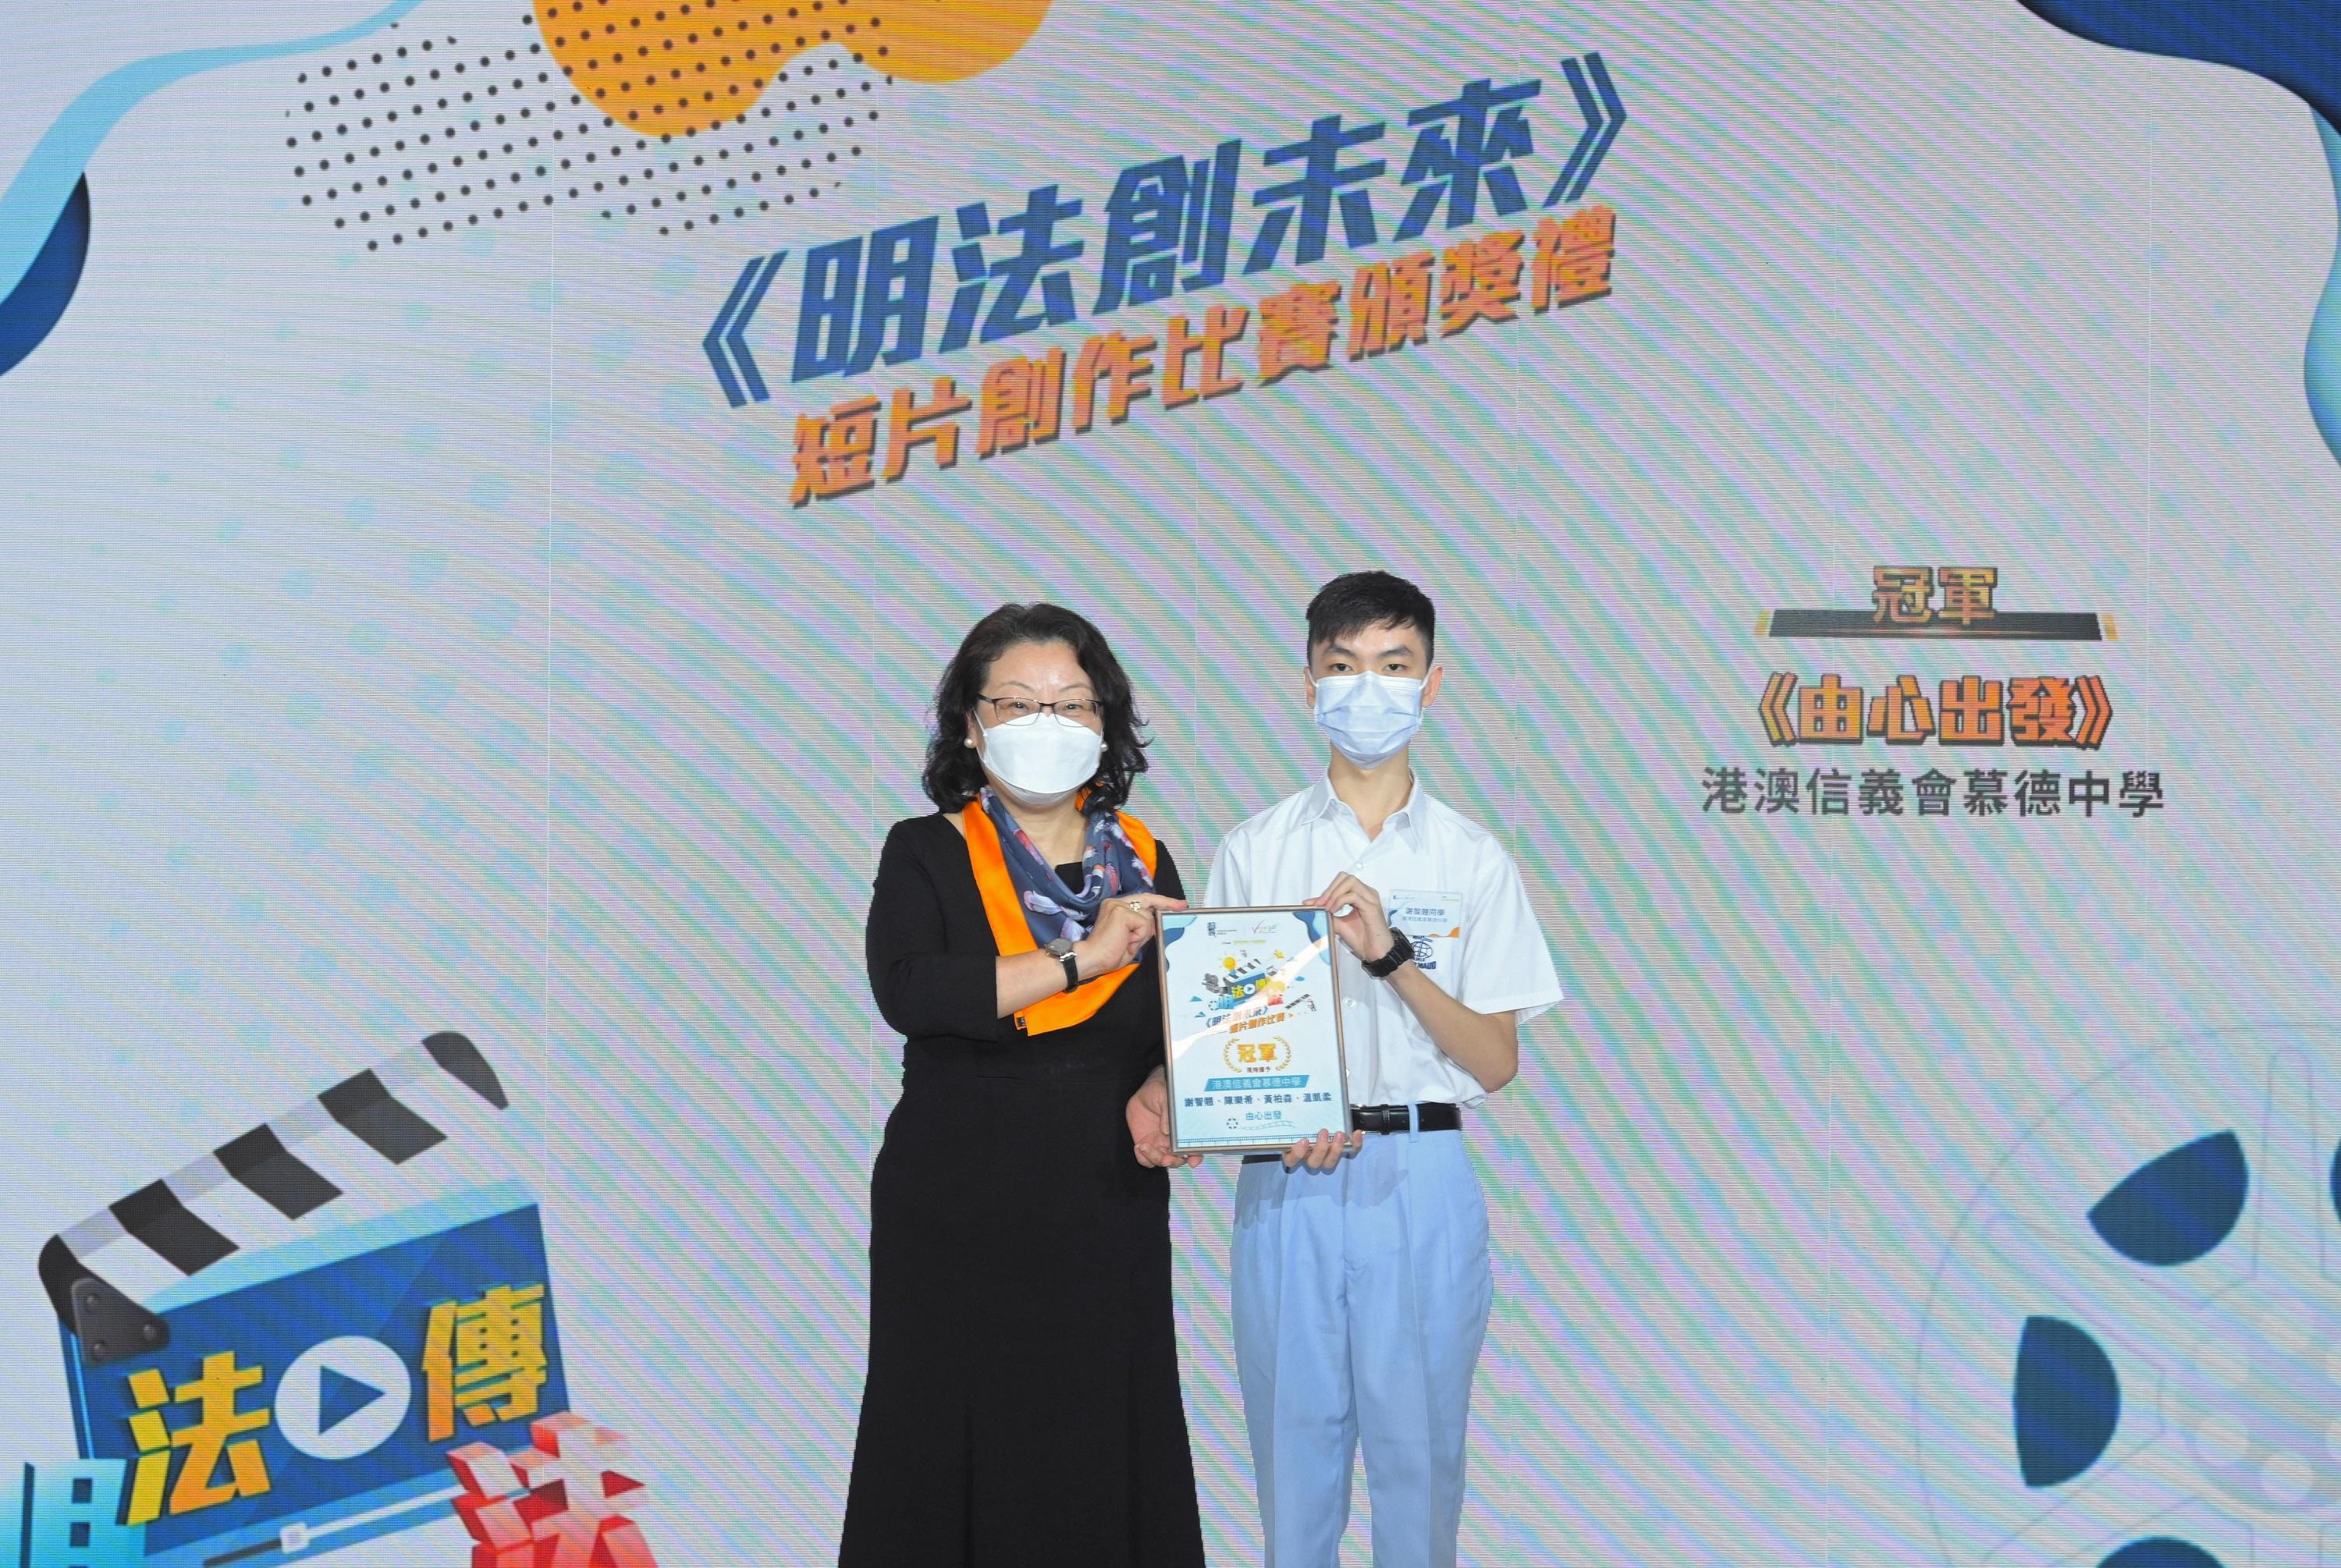 The "Key to the Future" Short Video Competition Award Presentation Ceremony organised by the Department of Justice was held today (May 7). Picture shows the Secretary for Justice, Ms Teresa Cheng, SC, presenting the gold award to the representative of the winning team.